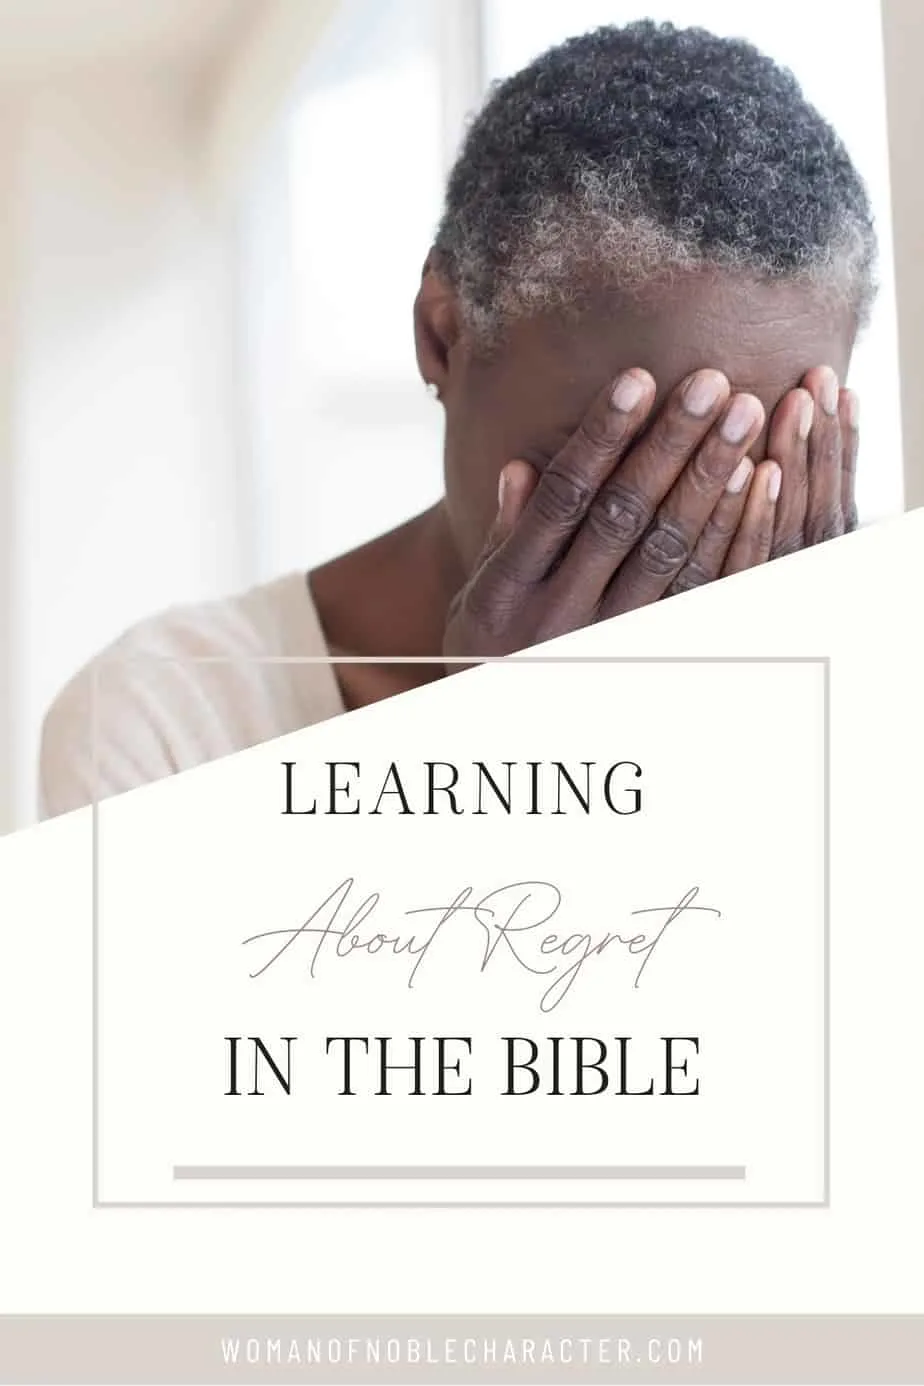 A woman covering her face with her hands with the title, "Learning about regret in the bible"